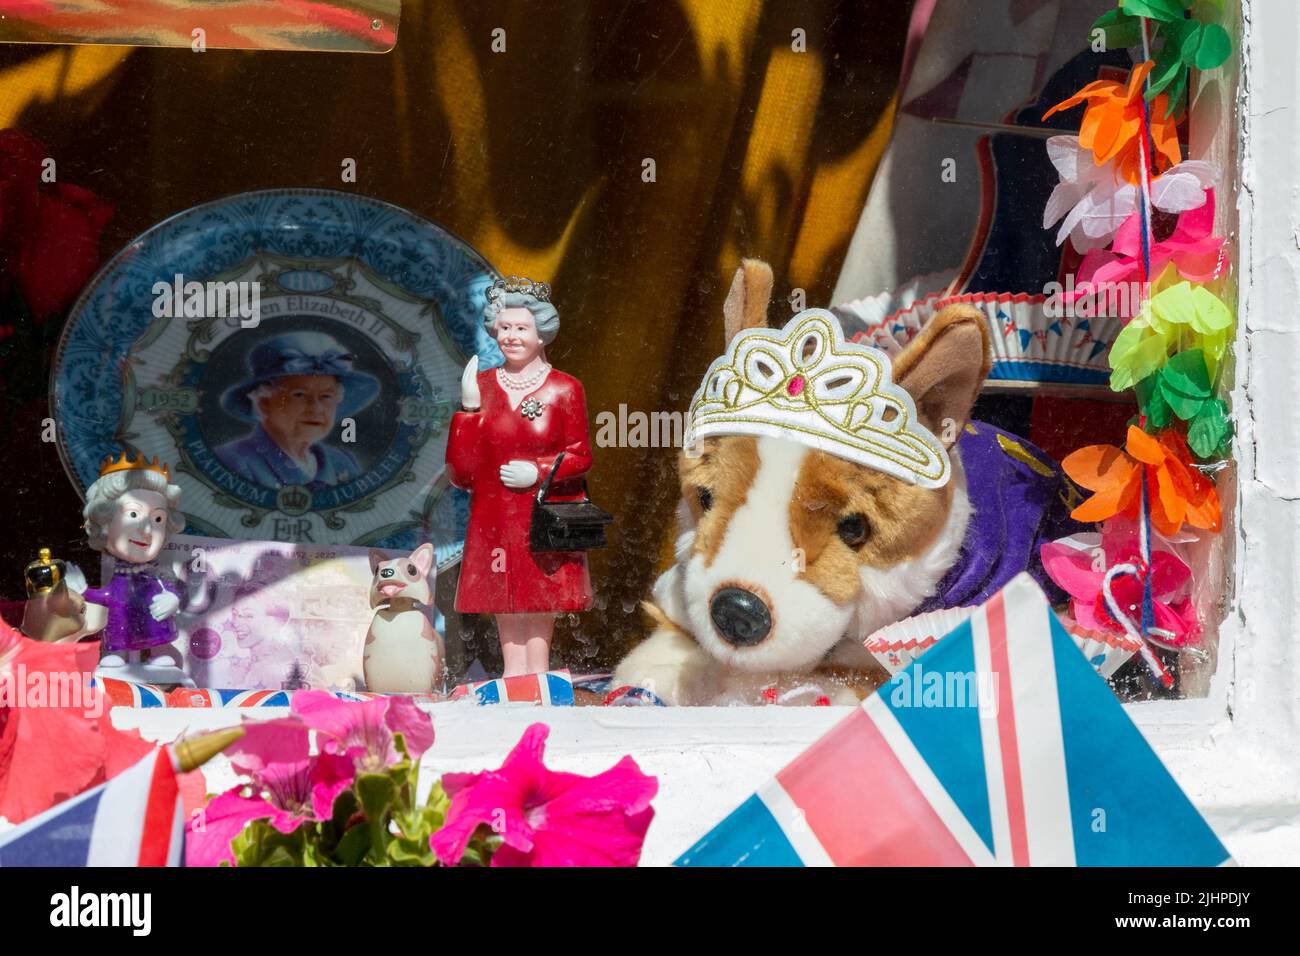 Unofficial decorations for the Platinum Jubilee of Queen Elizabeth II include a waving model queen and a soft toy corgi wearing a tiara. Stock Photo